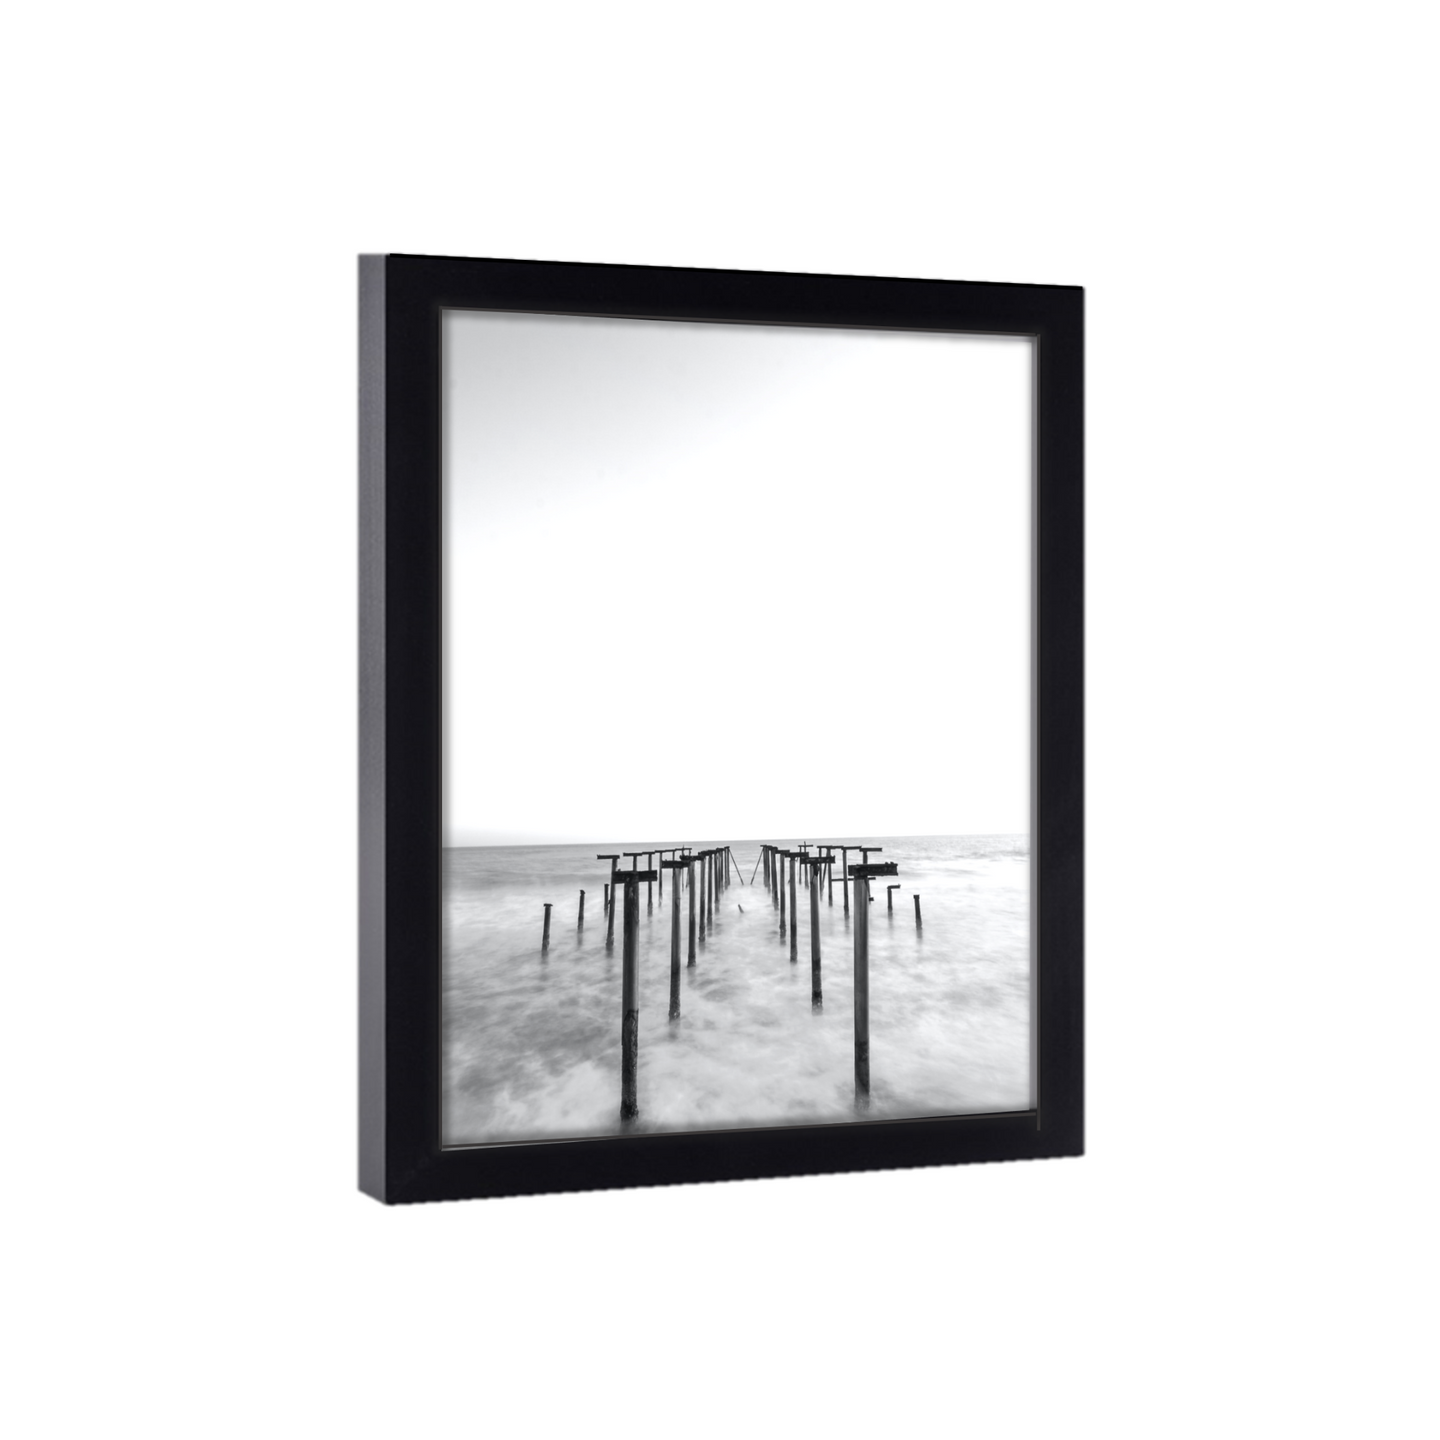 Gallery Wall 27x21 Picture Frame Black Wood 27x21  Poster Size